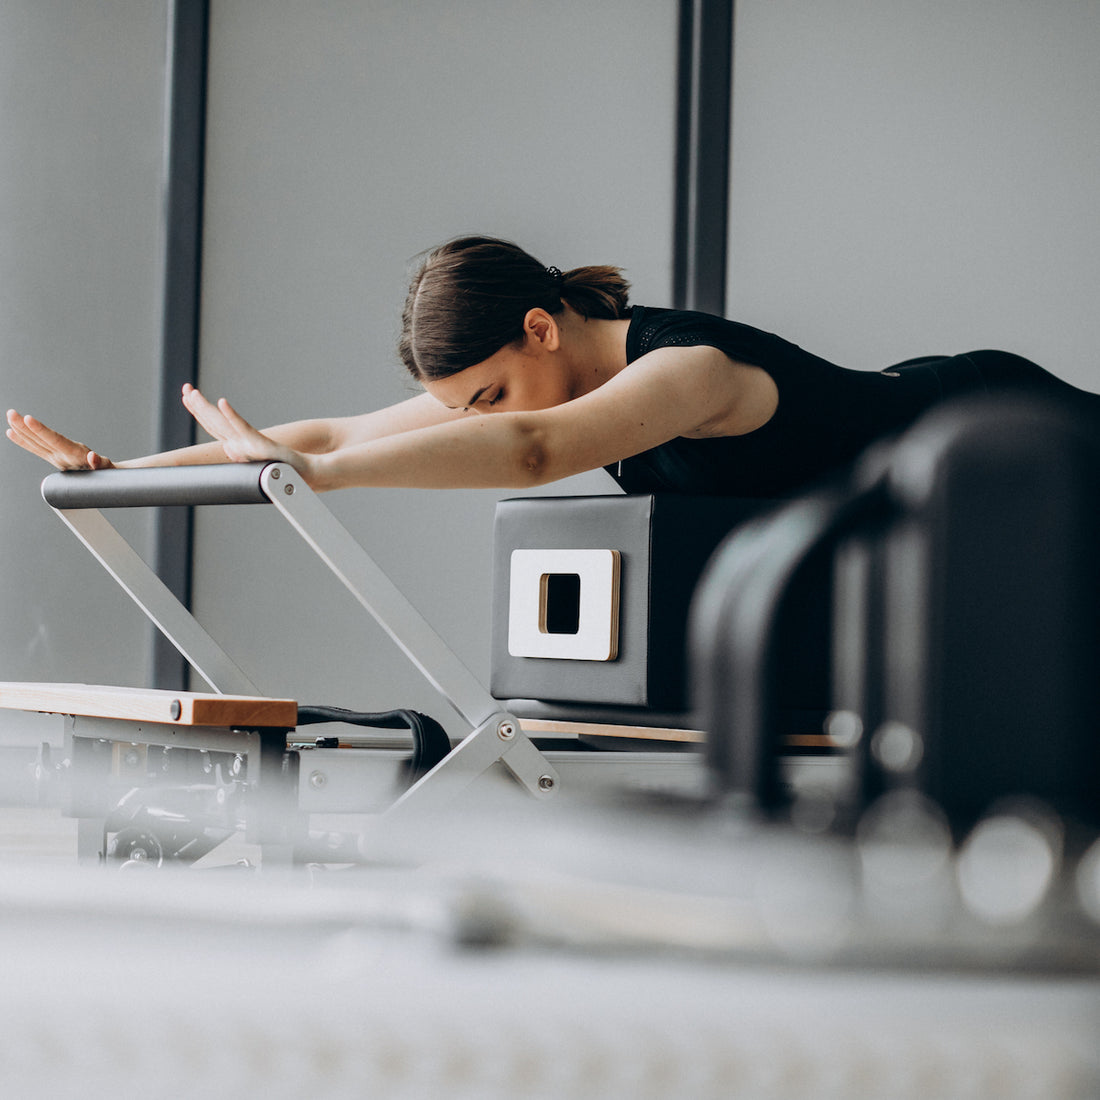 Can Pilates Help With My Back Pain? 3 Quick Pilates Exercises For You